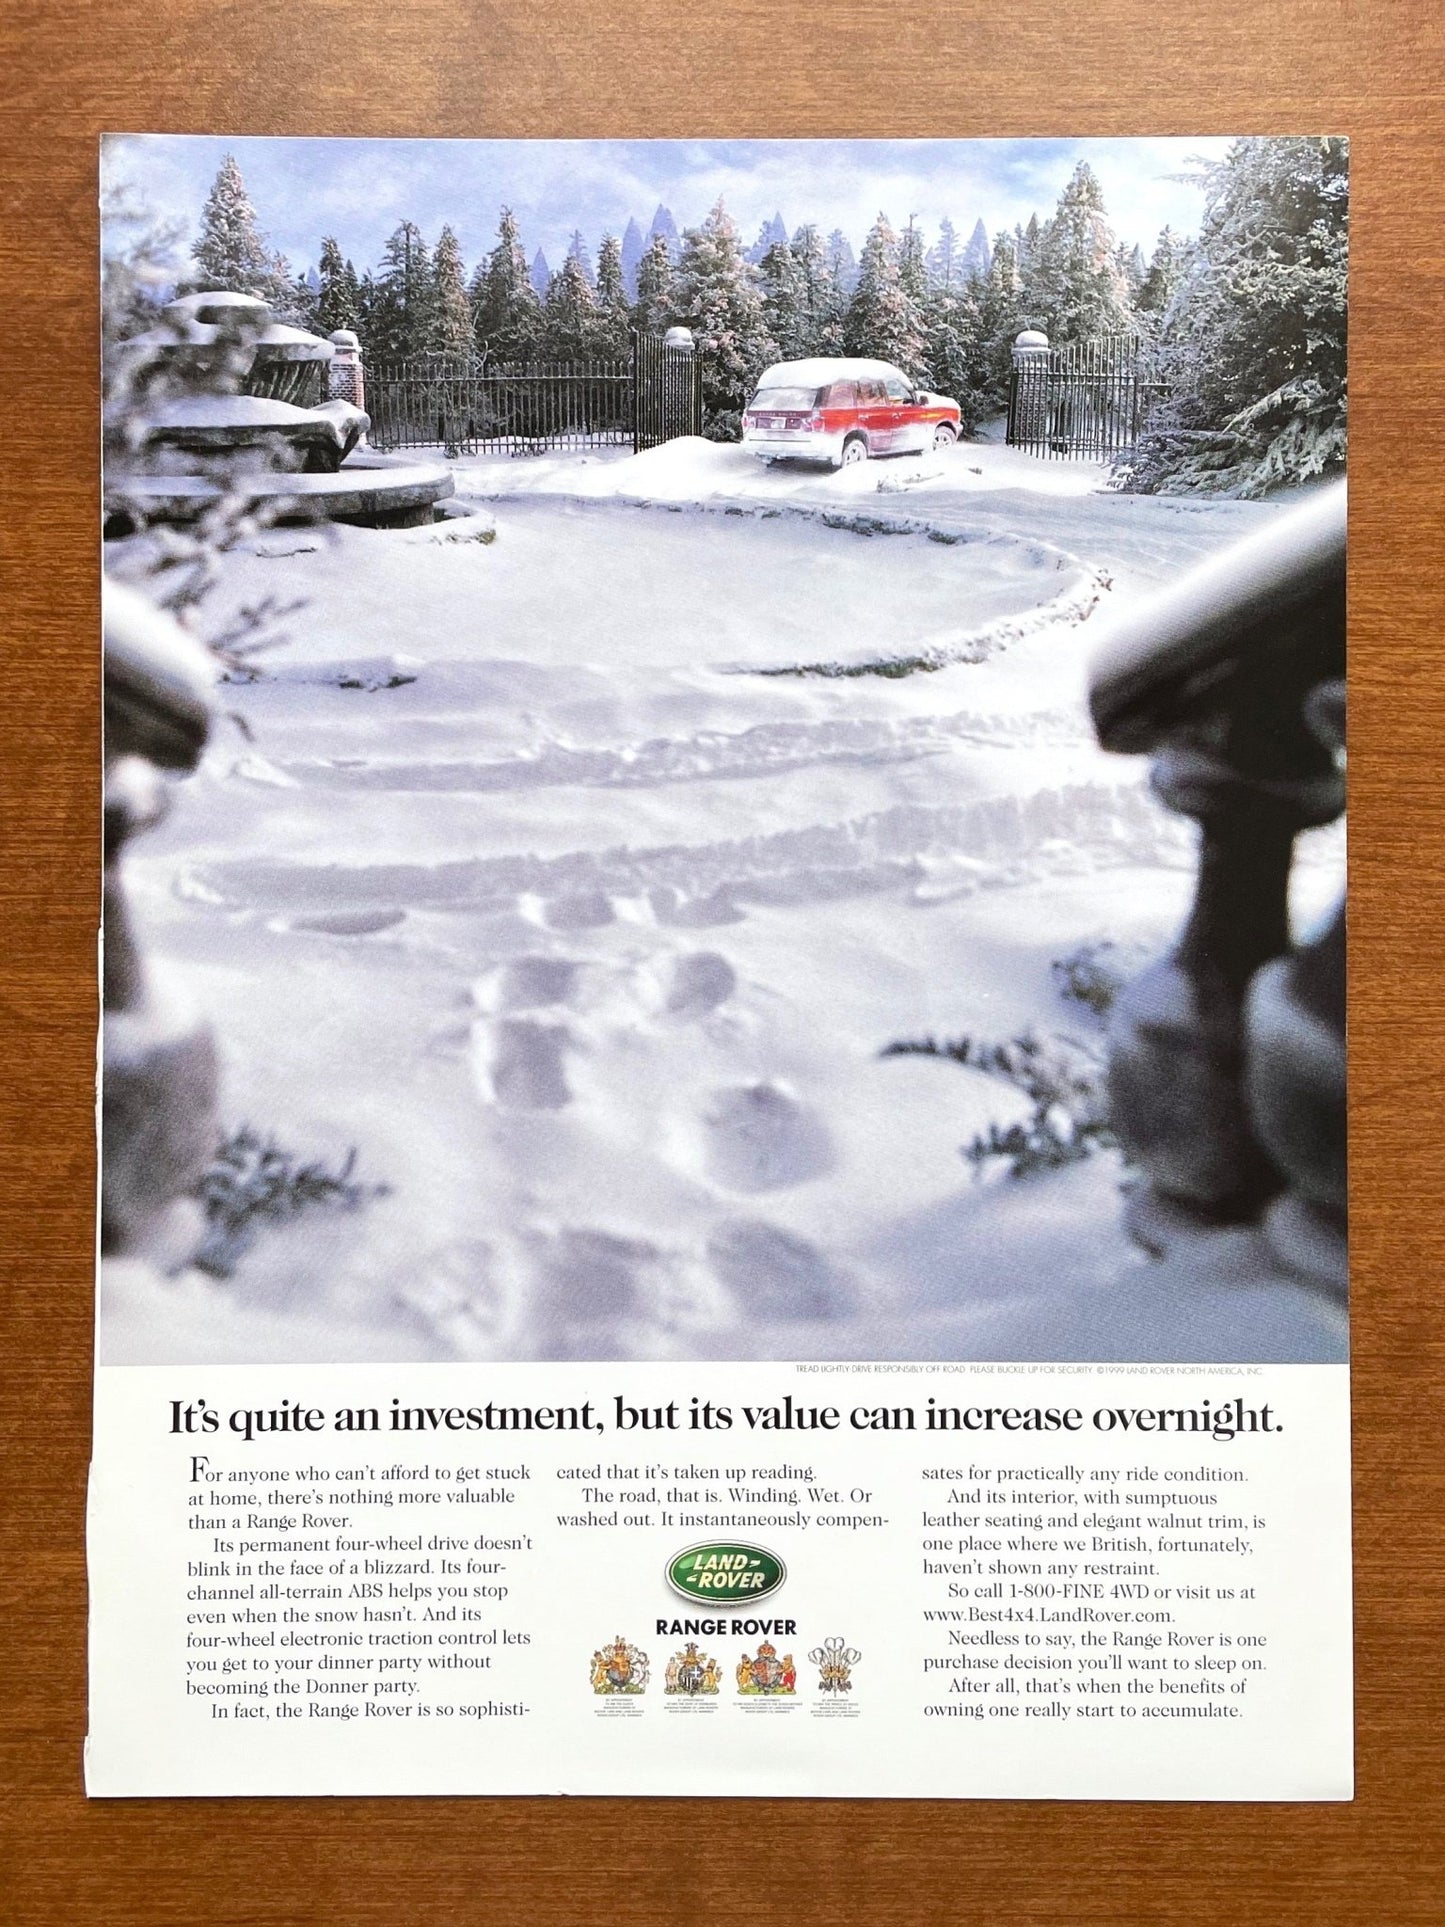 1999 Range Rover "value can increase overnight." Advertisement